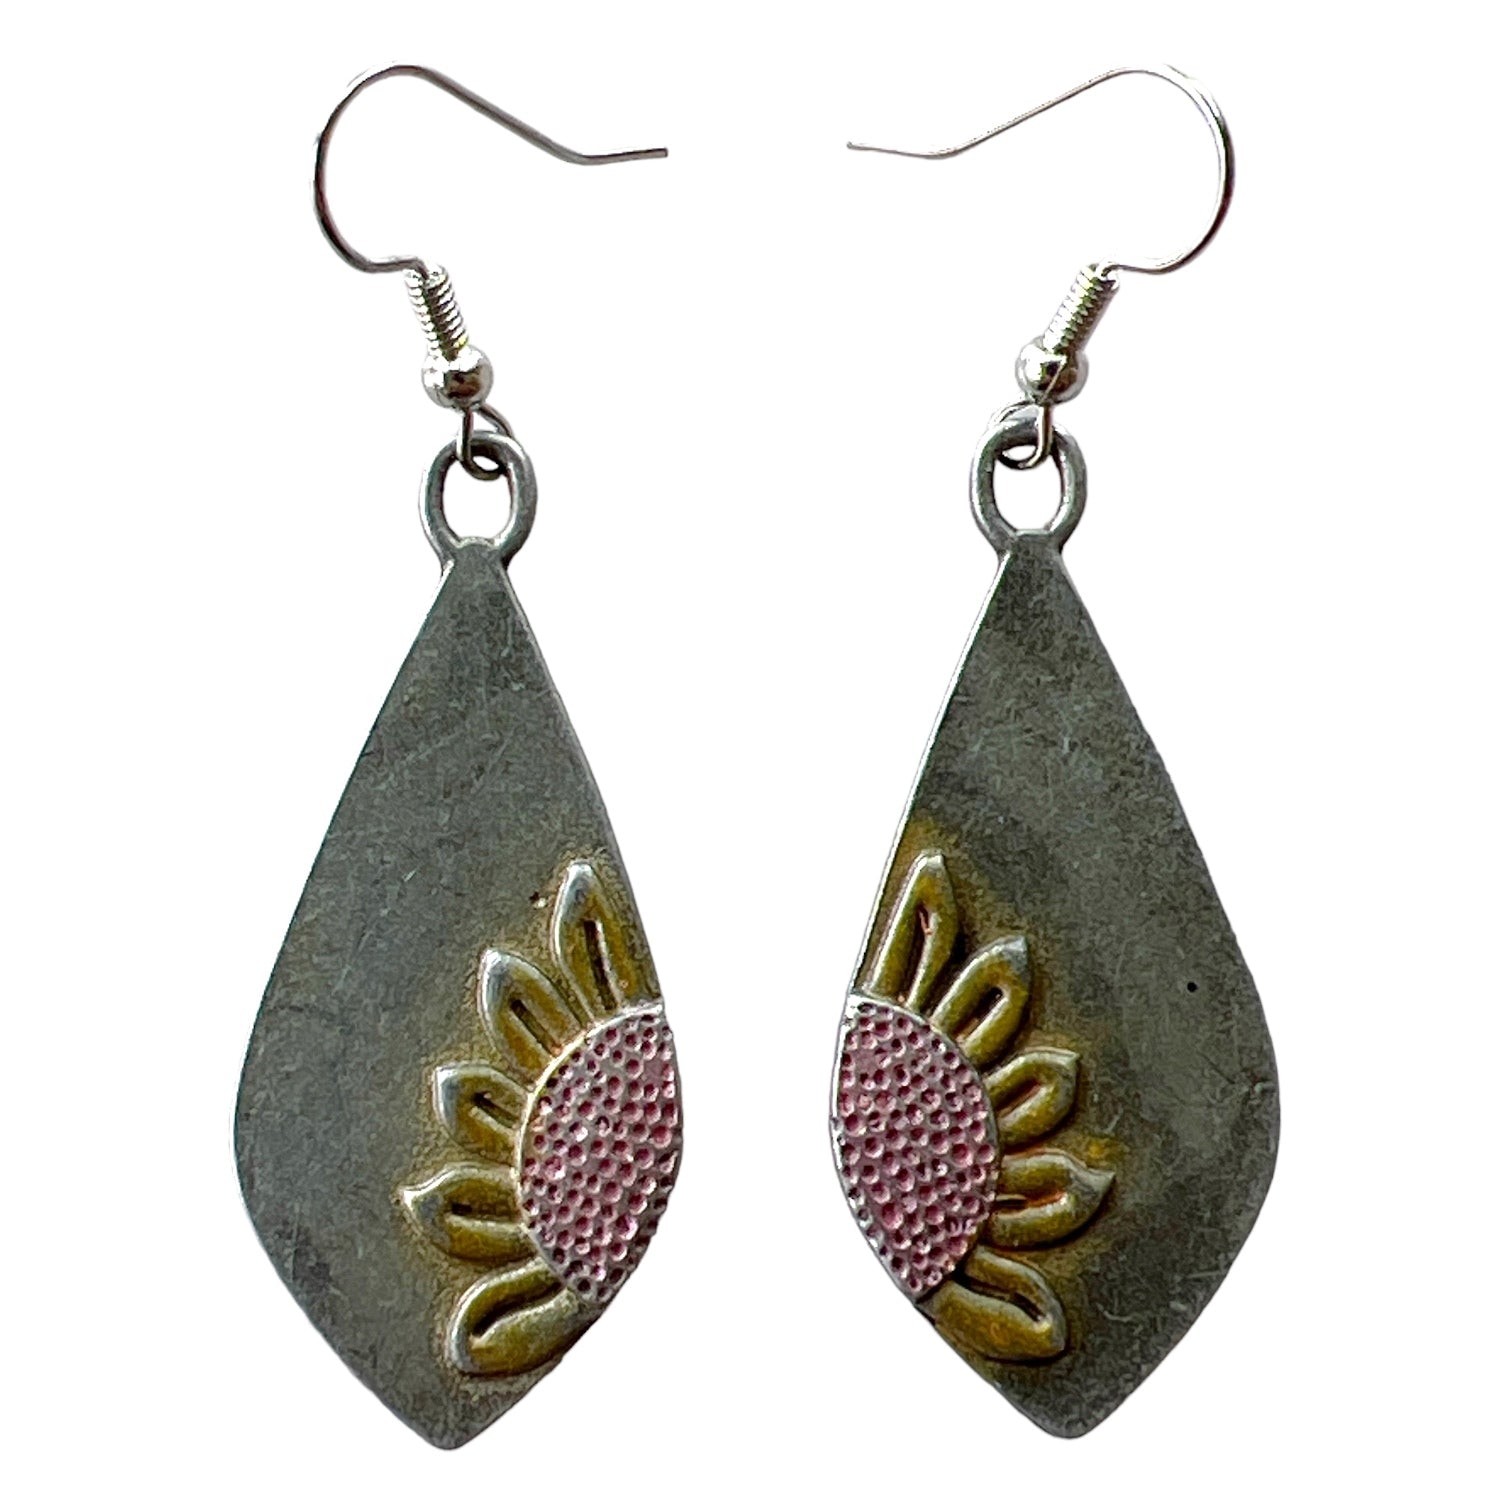 Teardrop Earrings with Sunflowers: Nature-Inspired Accessories